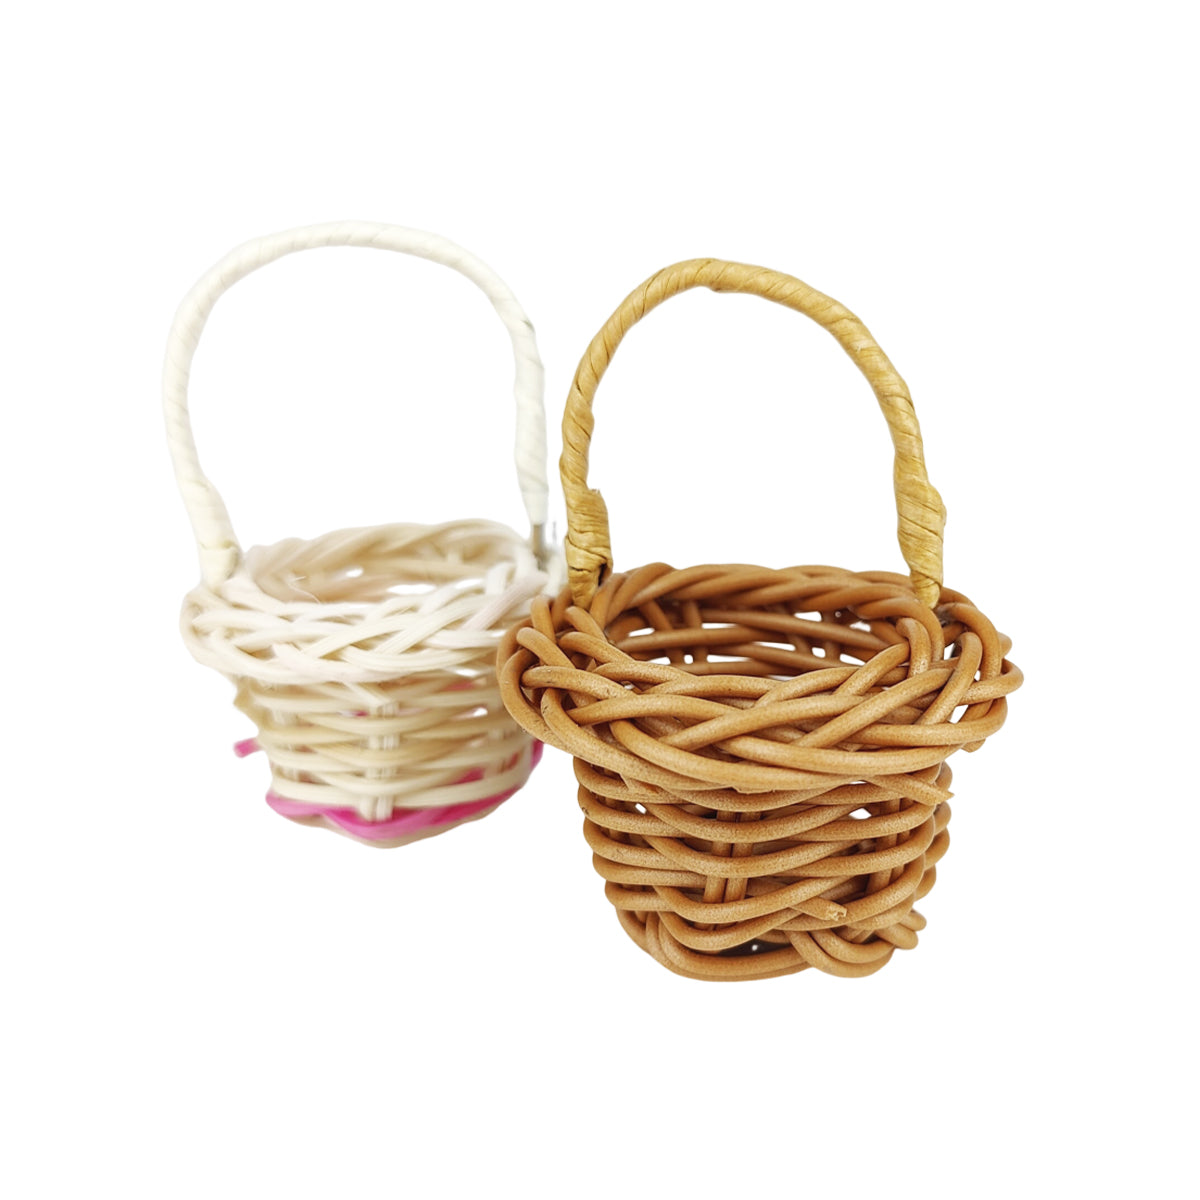 air plant basket, air plant container, small air plant holder, cute air plant basket, cute air plant holder for home and office decor